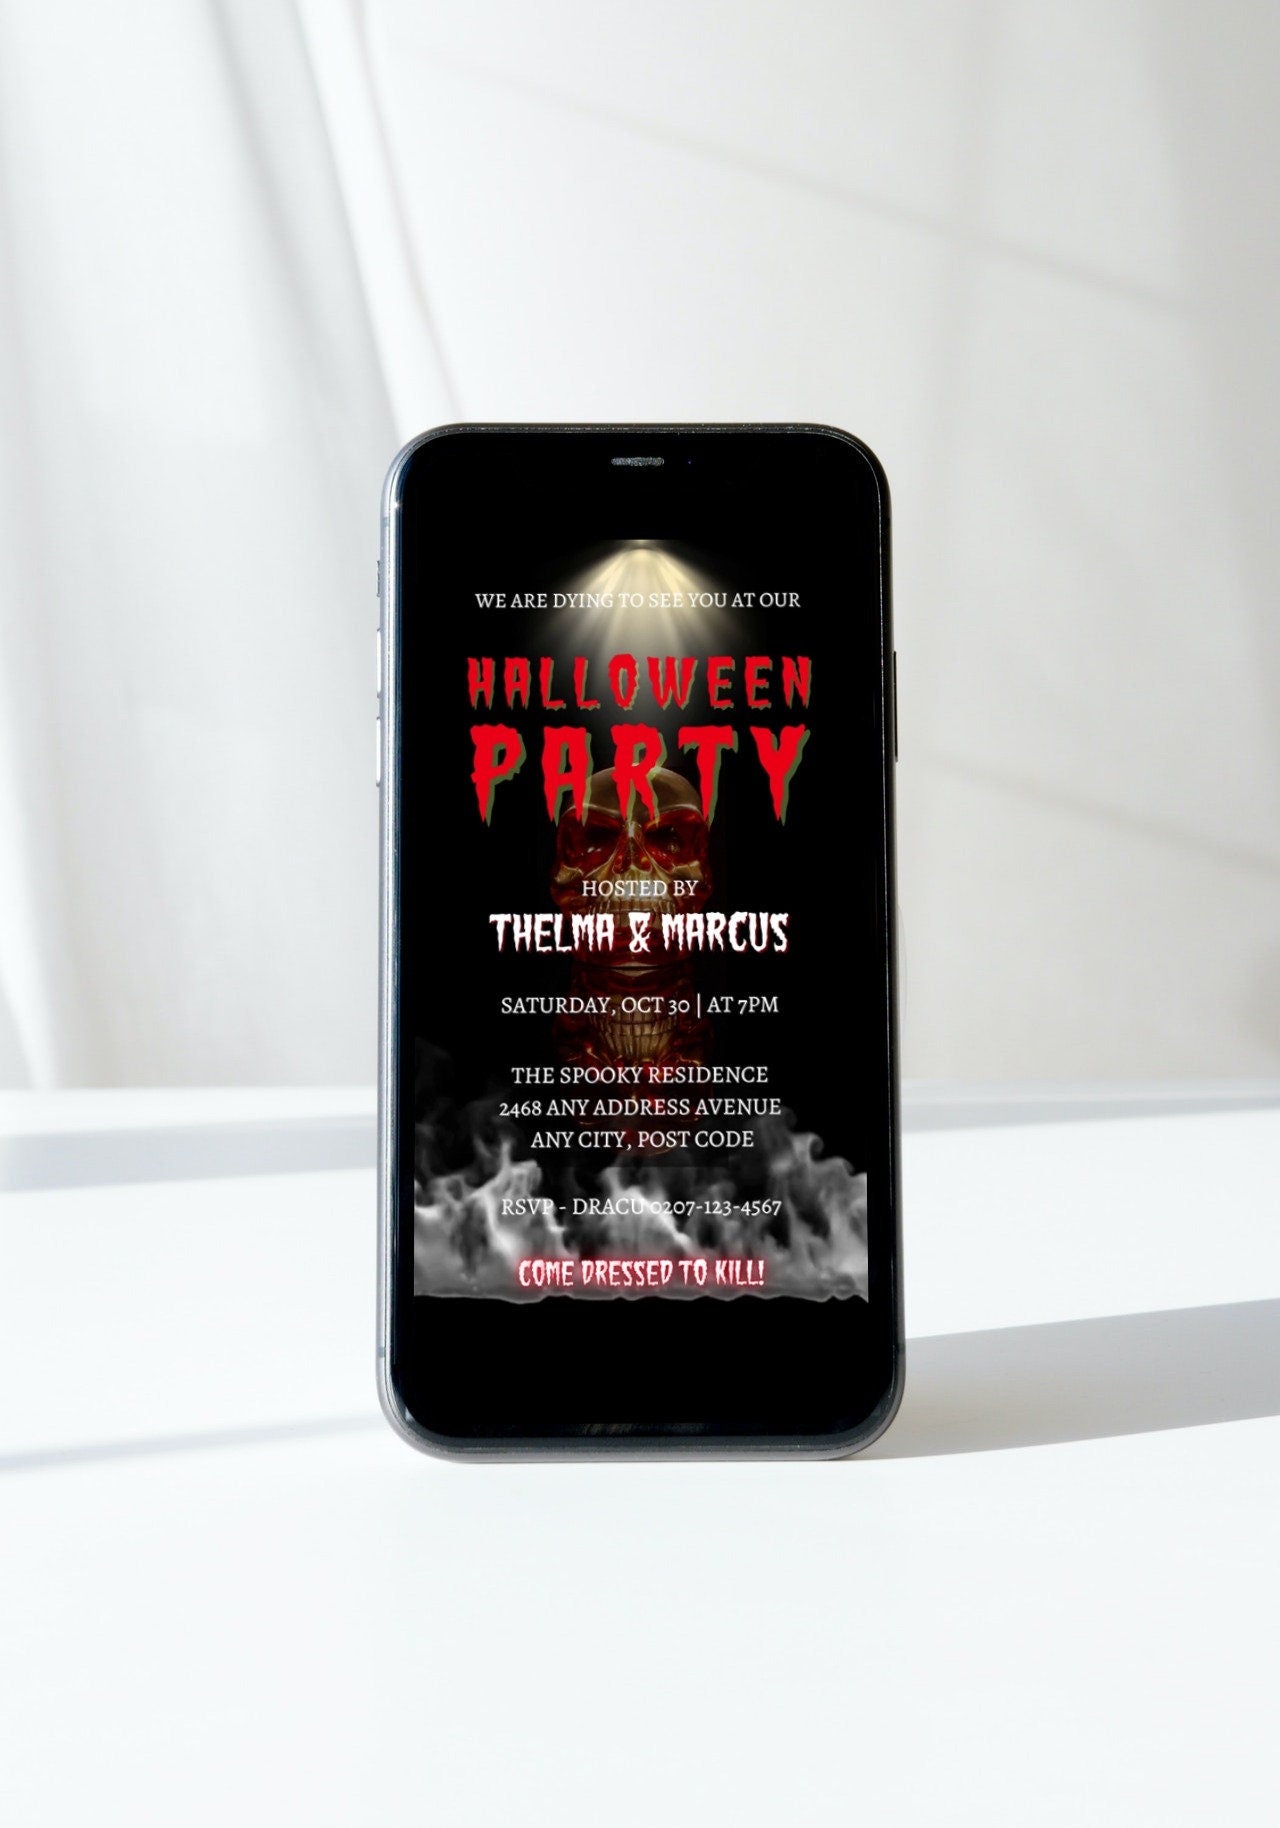 Animated Digital Halloween Party Video Invitation, Red Skull, Electronic Editable Adult Halloween Party Template Invite, , Instant DOWNLOAD. The best for men, digital Halloween party invitation for smartphone, best seller, currently on sale now.